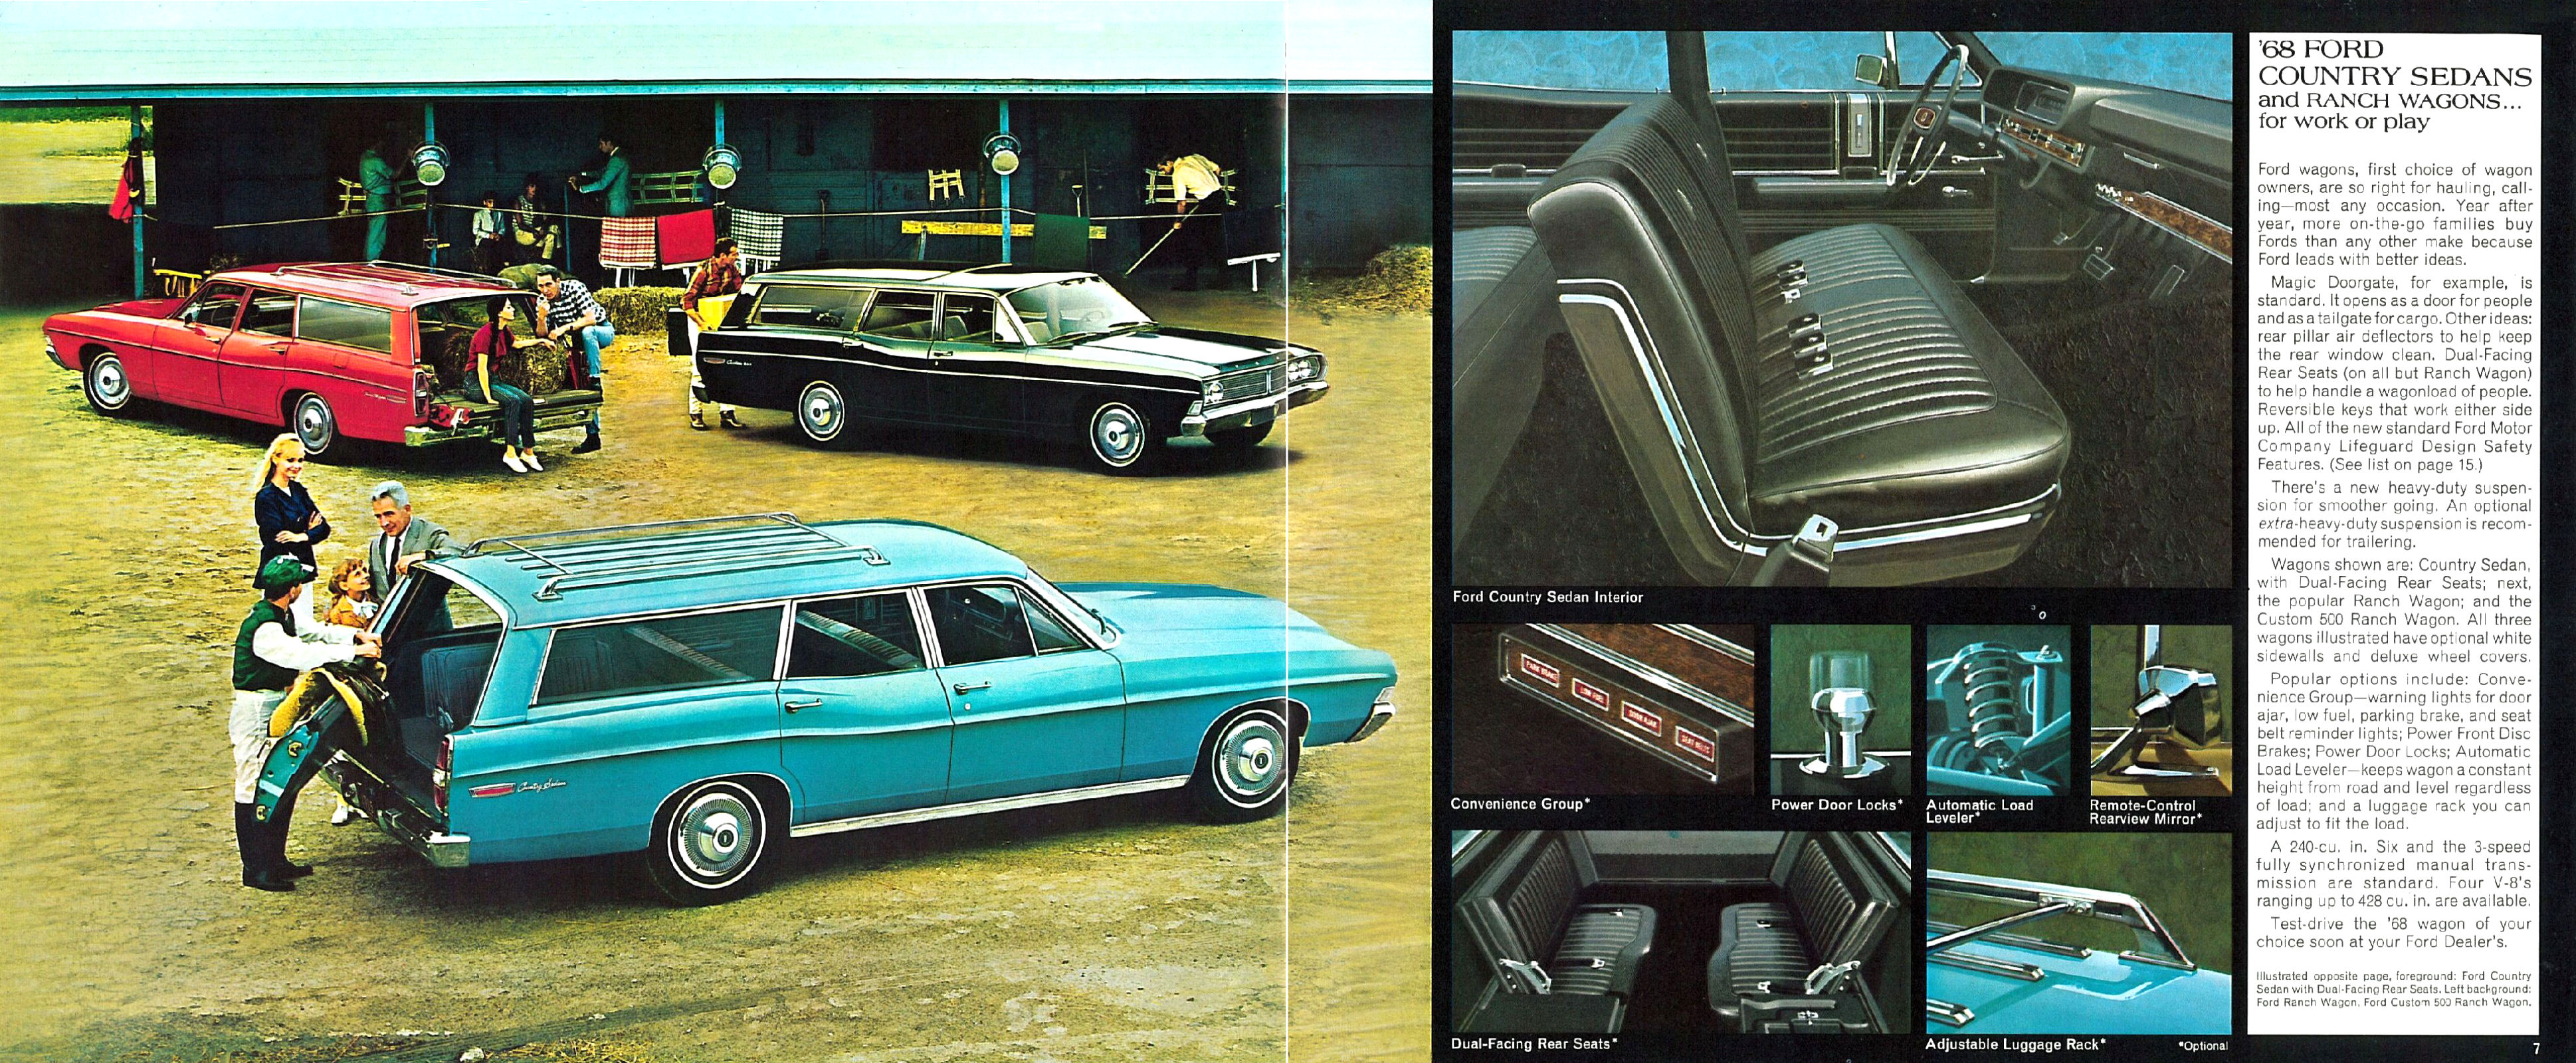 1968 Ford Wagons-06-07